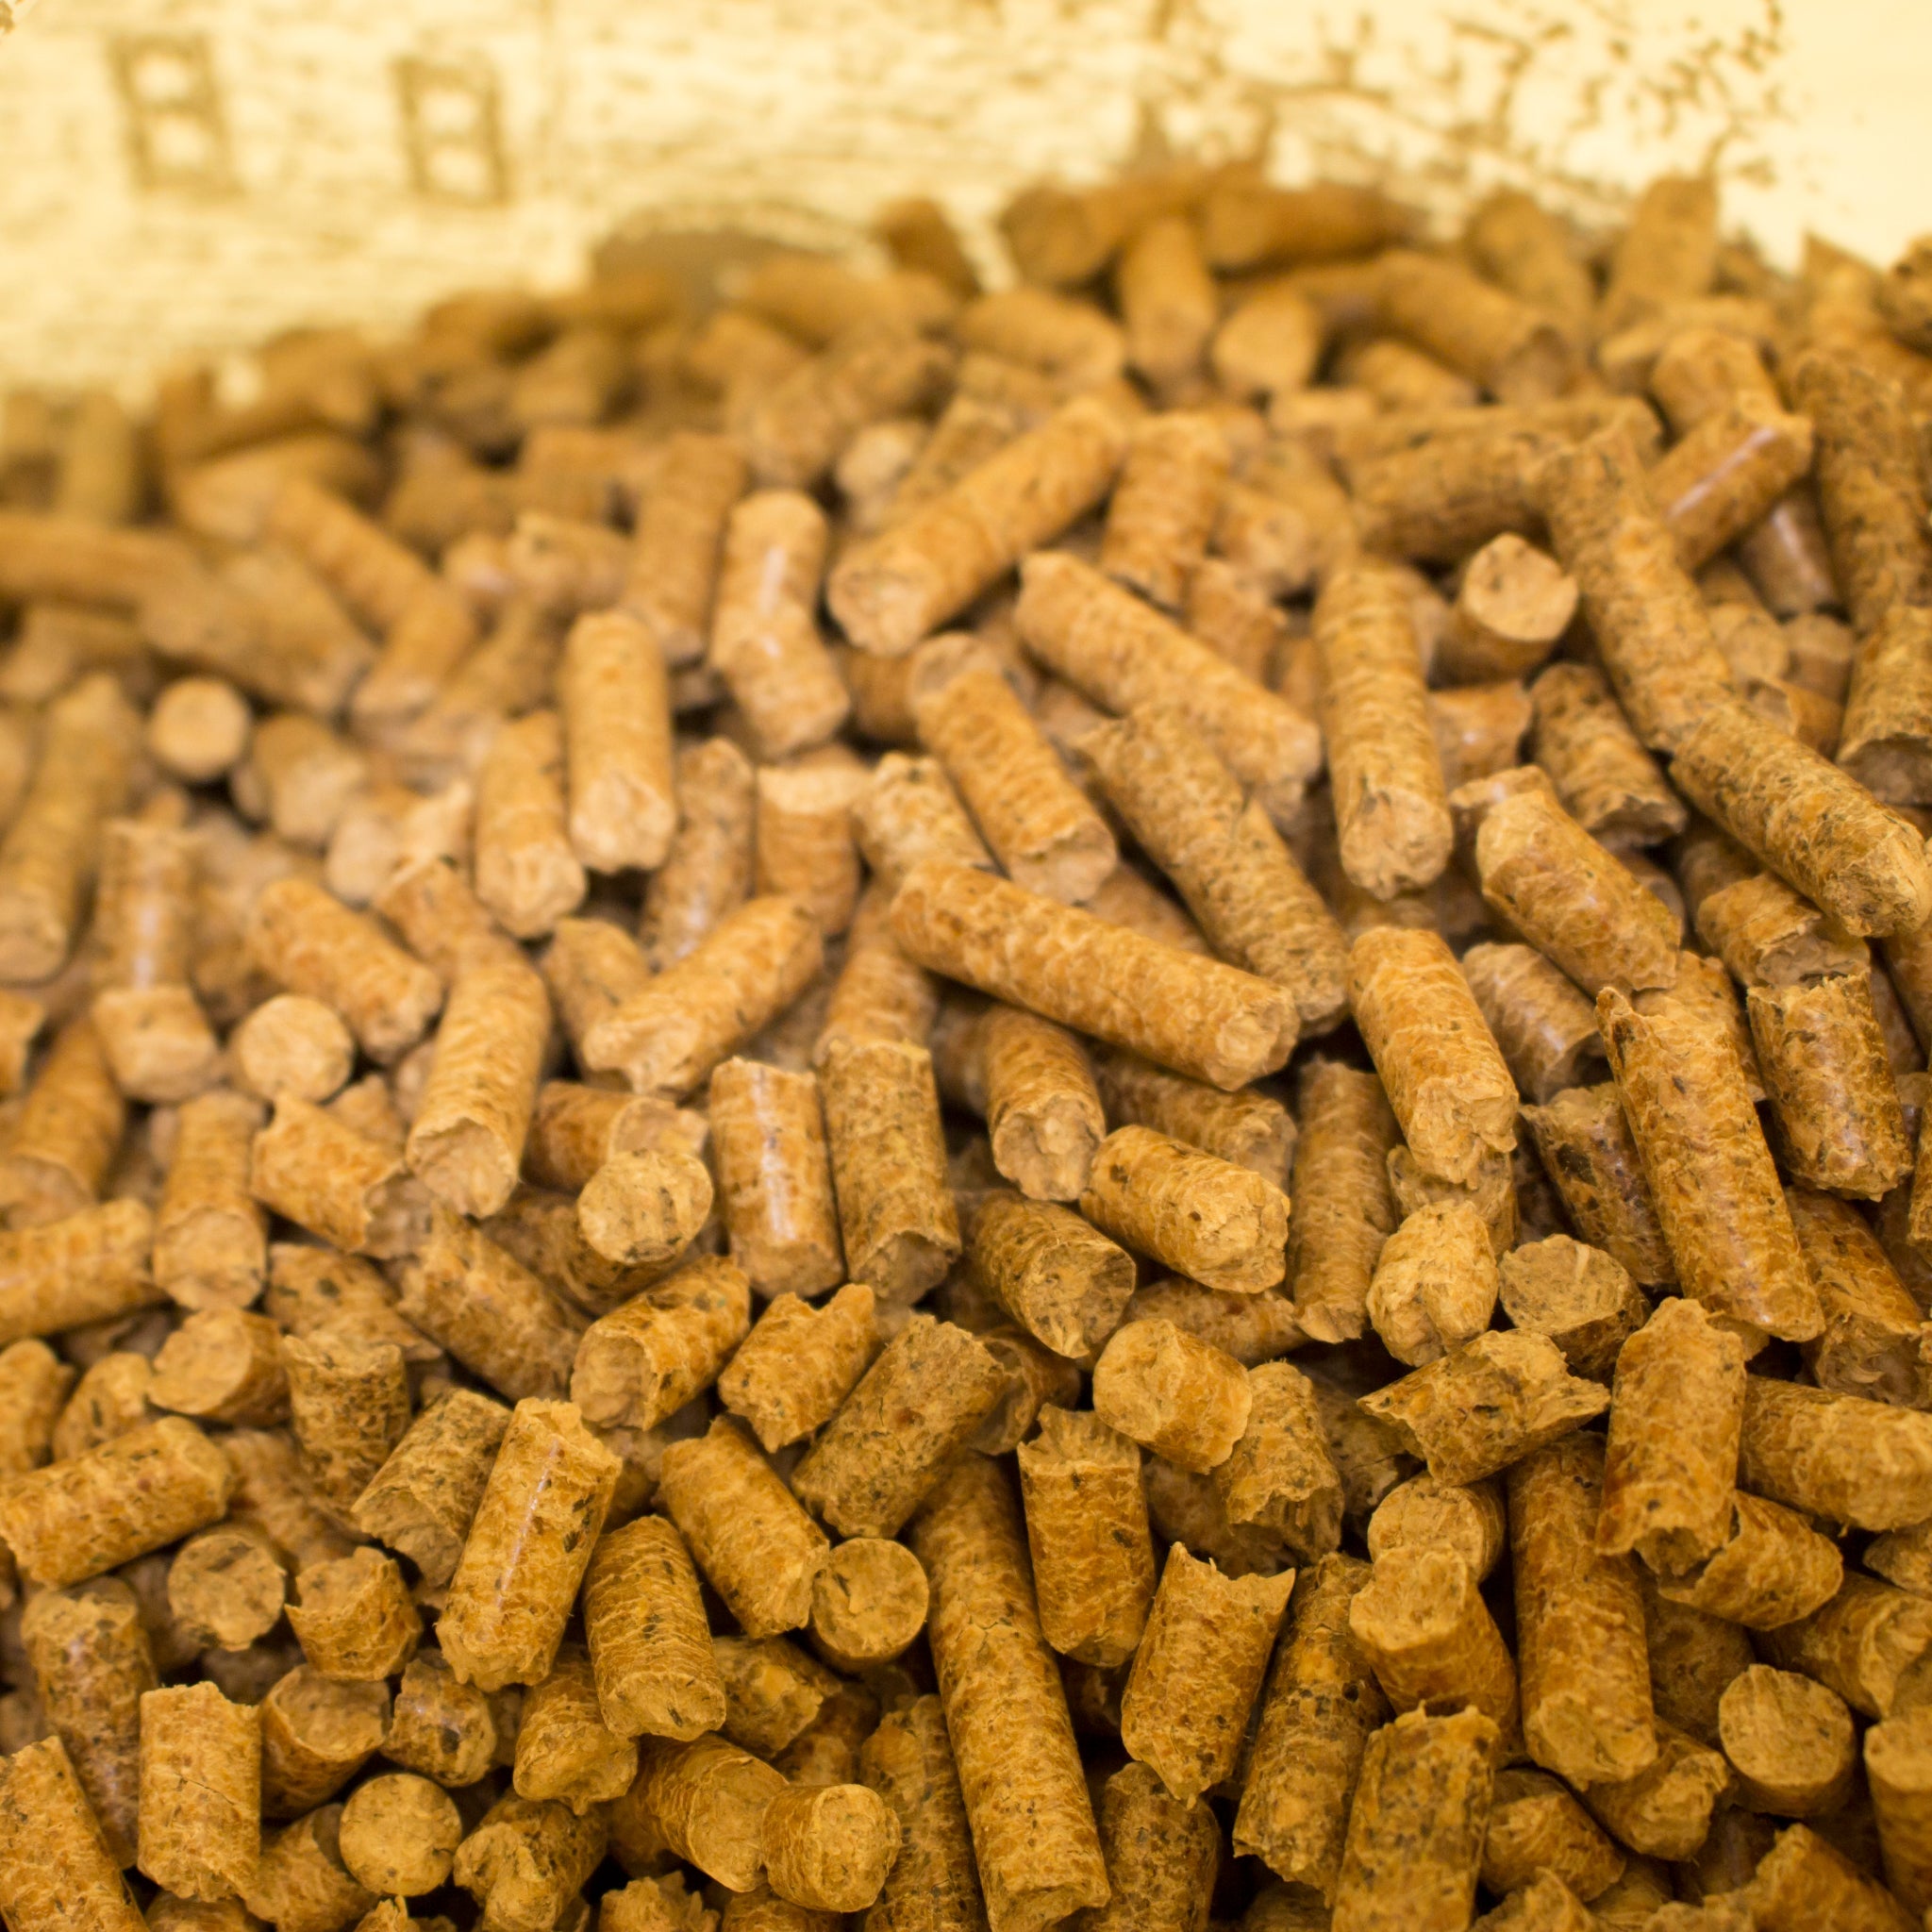 Premium Wood Pellets By the Bag or By the Ton